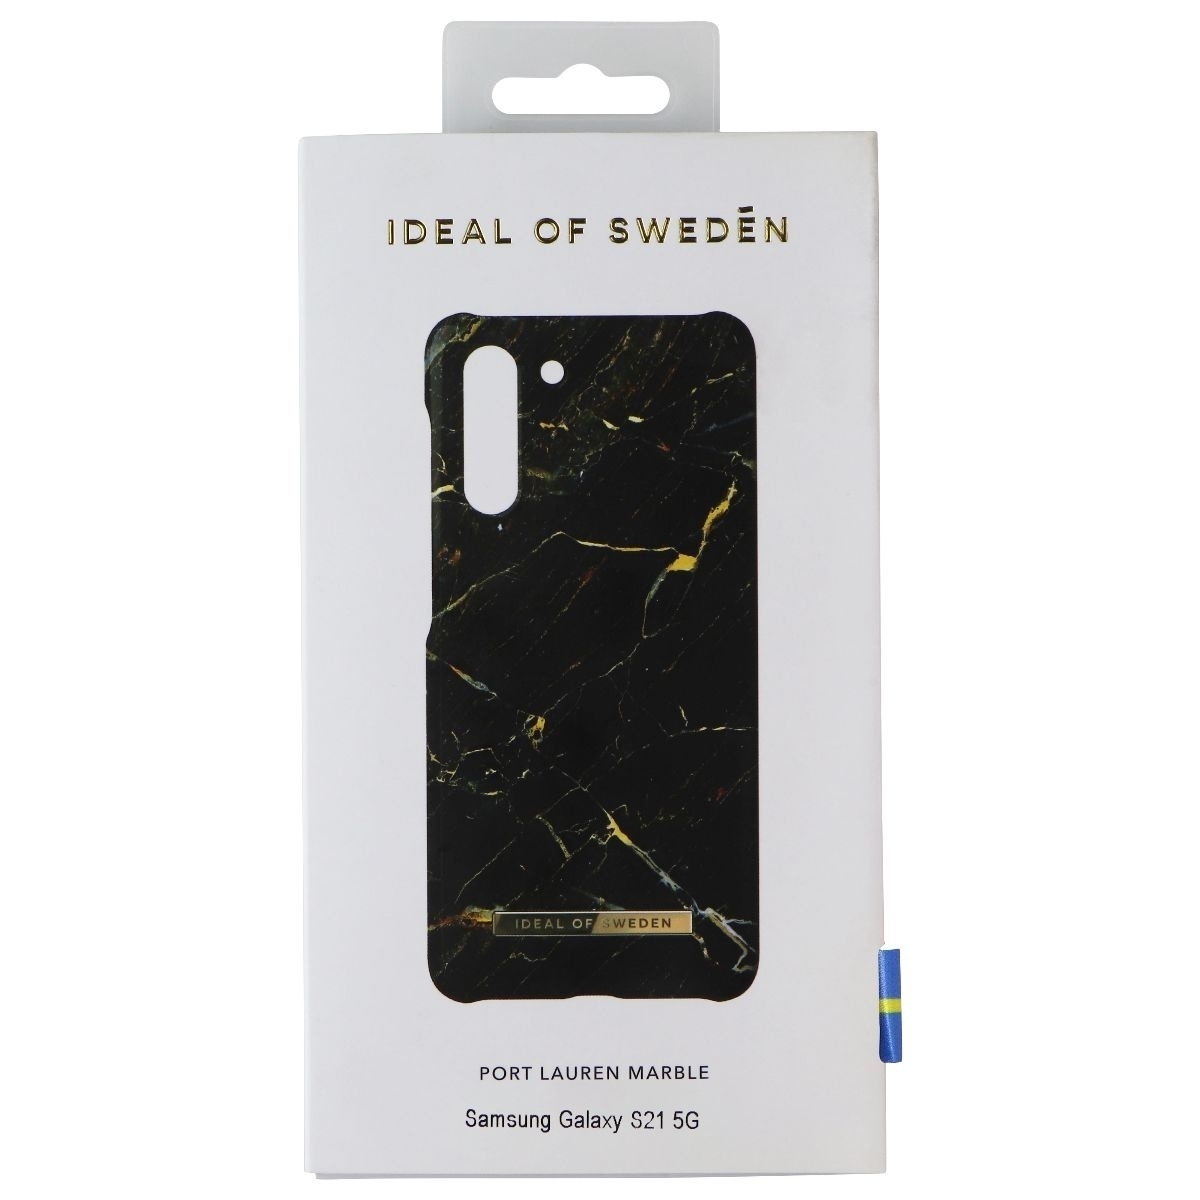 IDeal Of Sweden Printed Case For Samsung Galaxy S21 5G - Port Lauren Marble